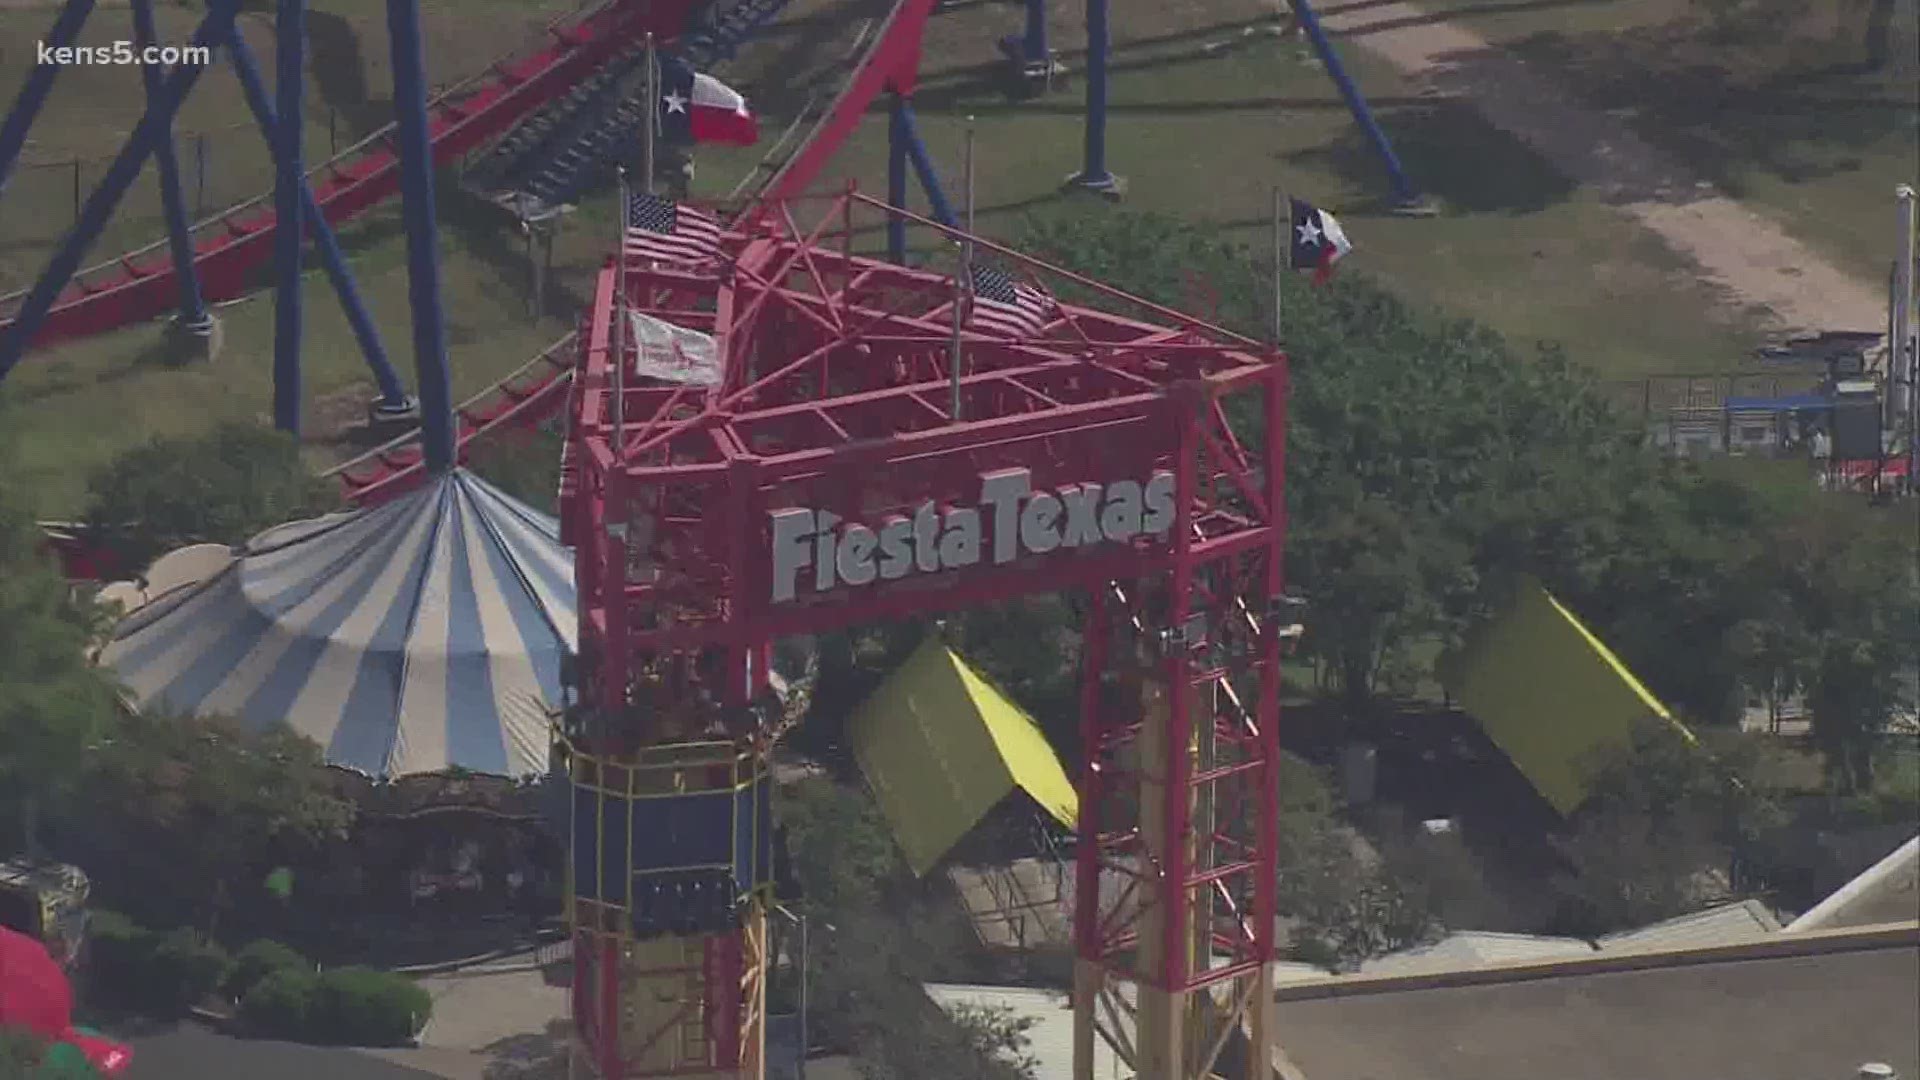 Six Flags announces reopening date after being closed due to